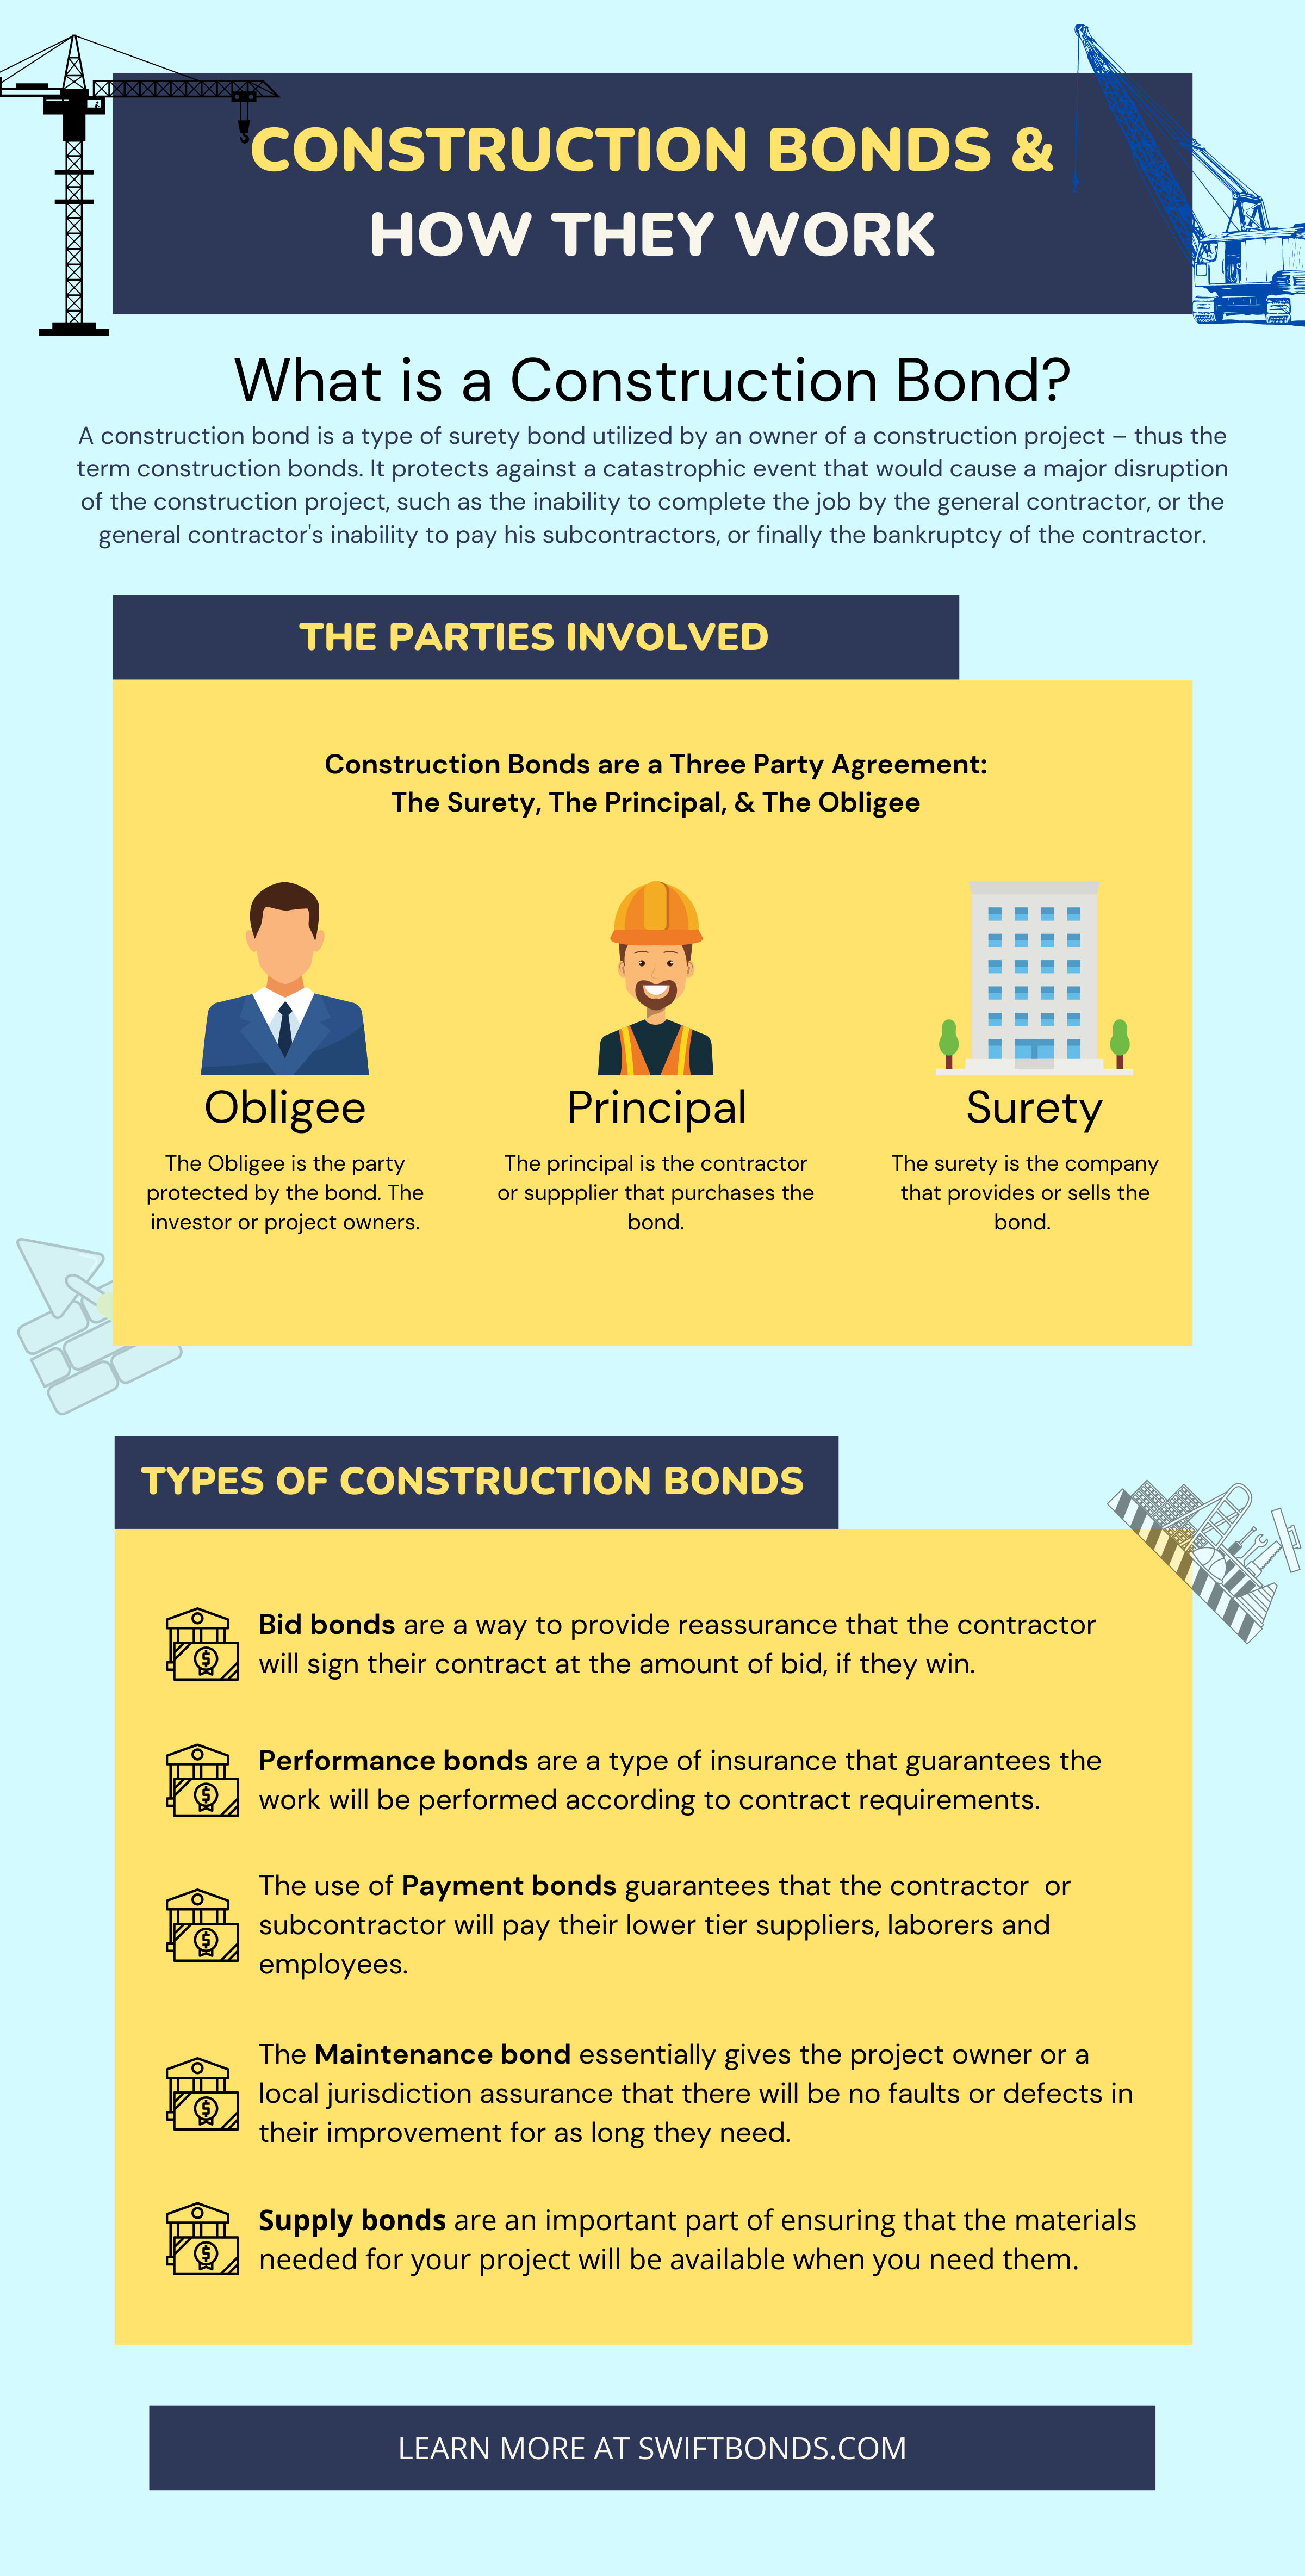 What is a Construction Bond? Construction bond is a type of surety bond. Pictures of Obligee, Principal, Surety on multi color background.